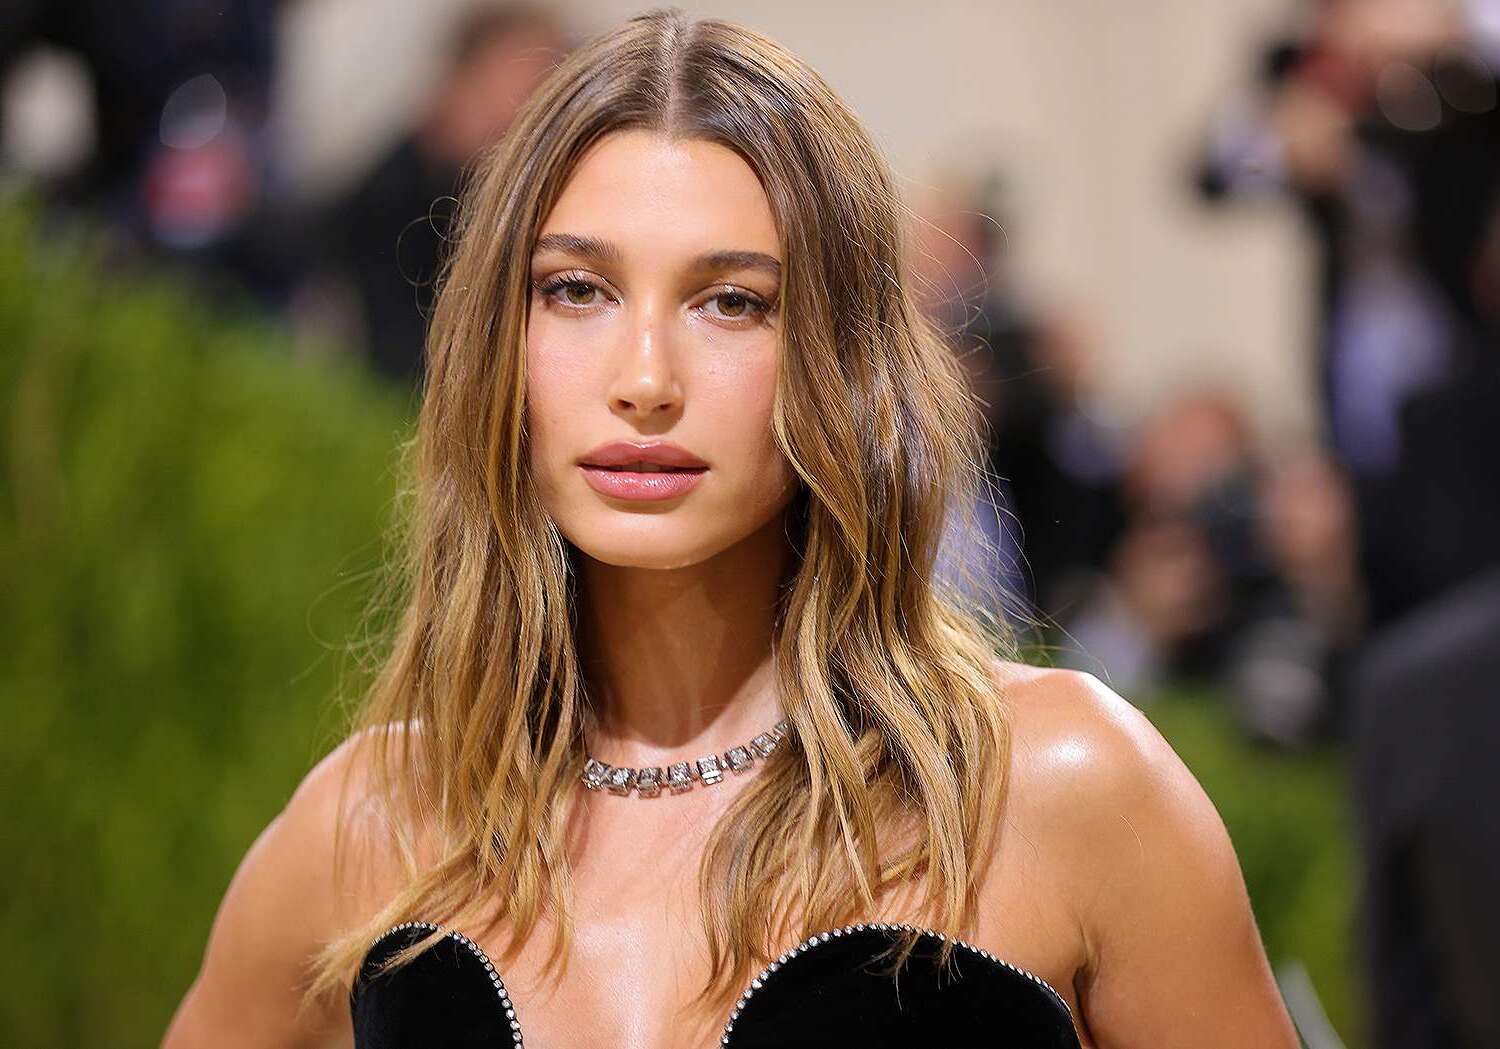 Hailey Bieber Upset With Father Stephen Baldwin’s Public Request For Prayers